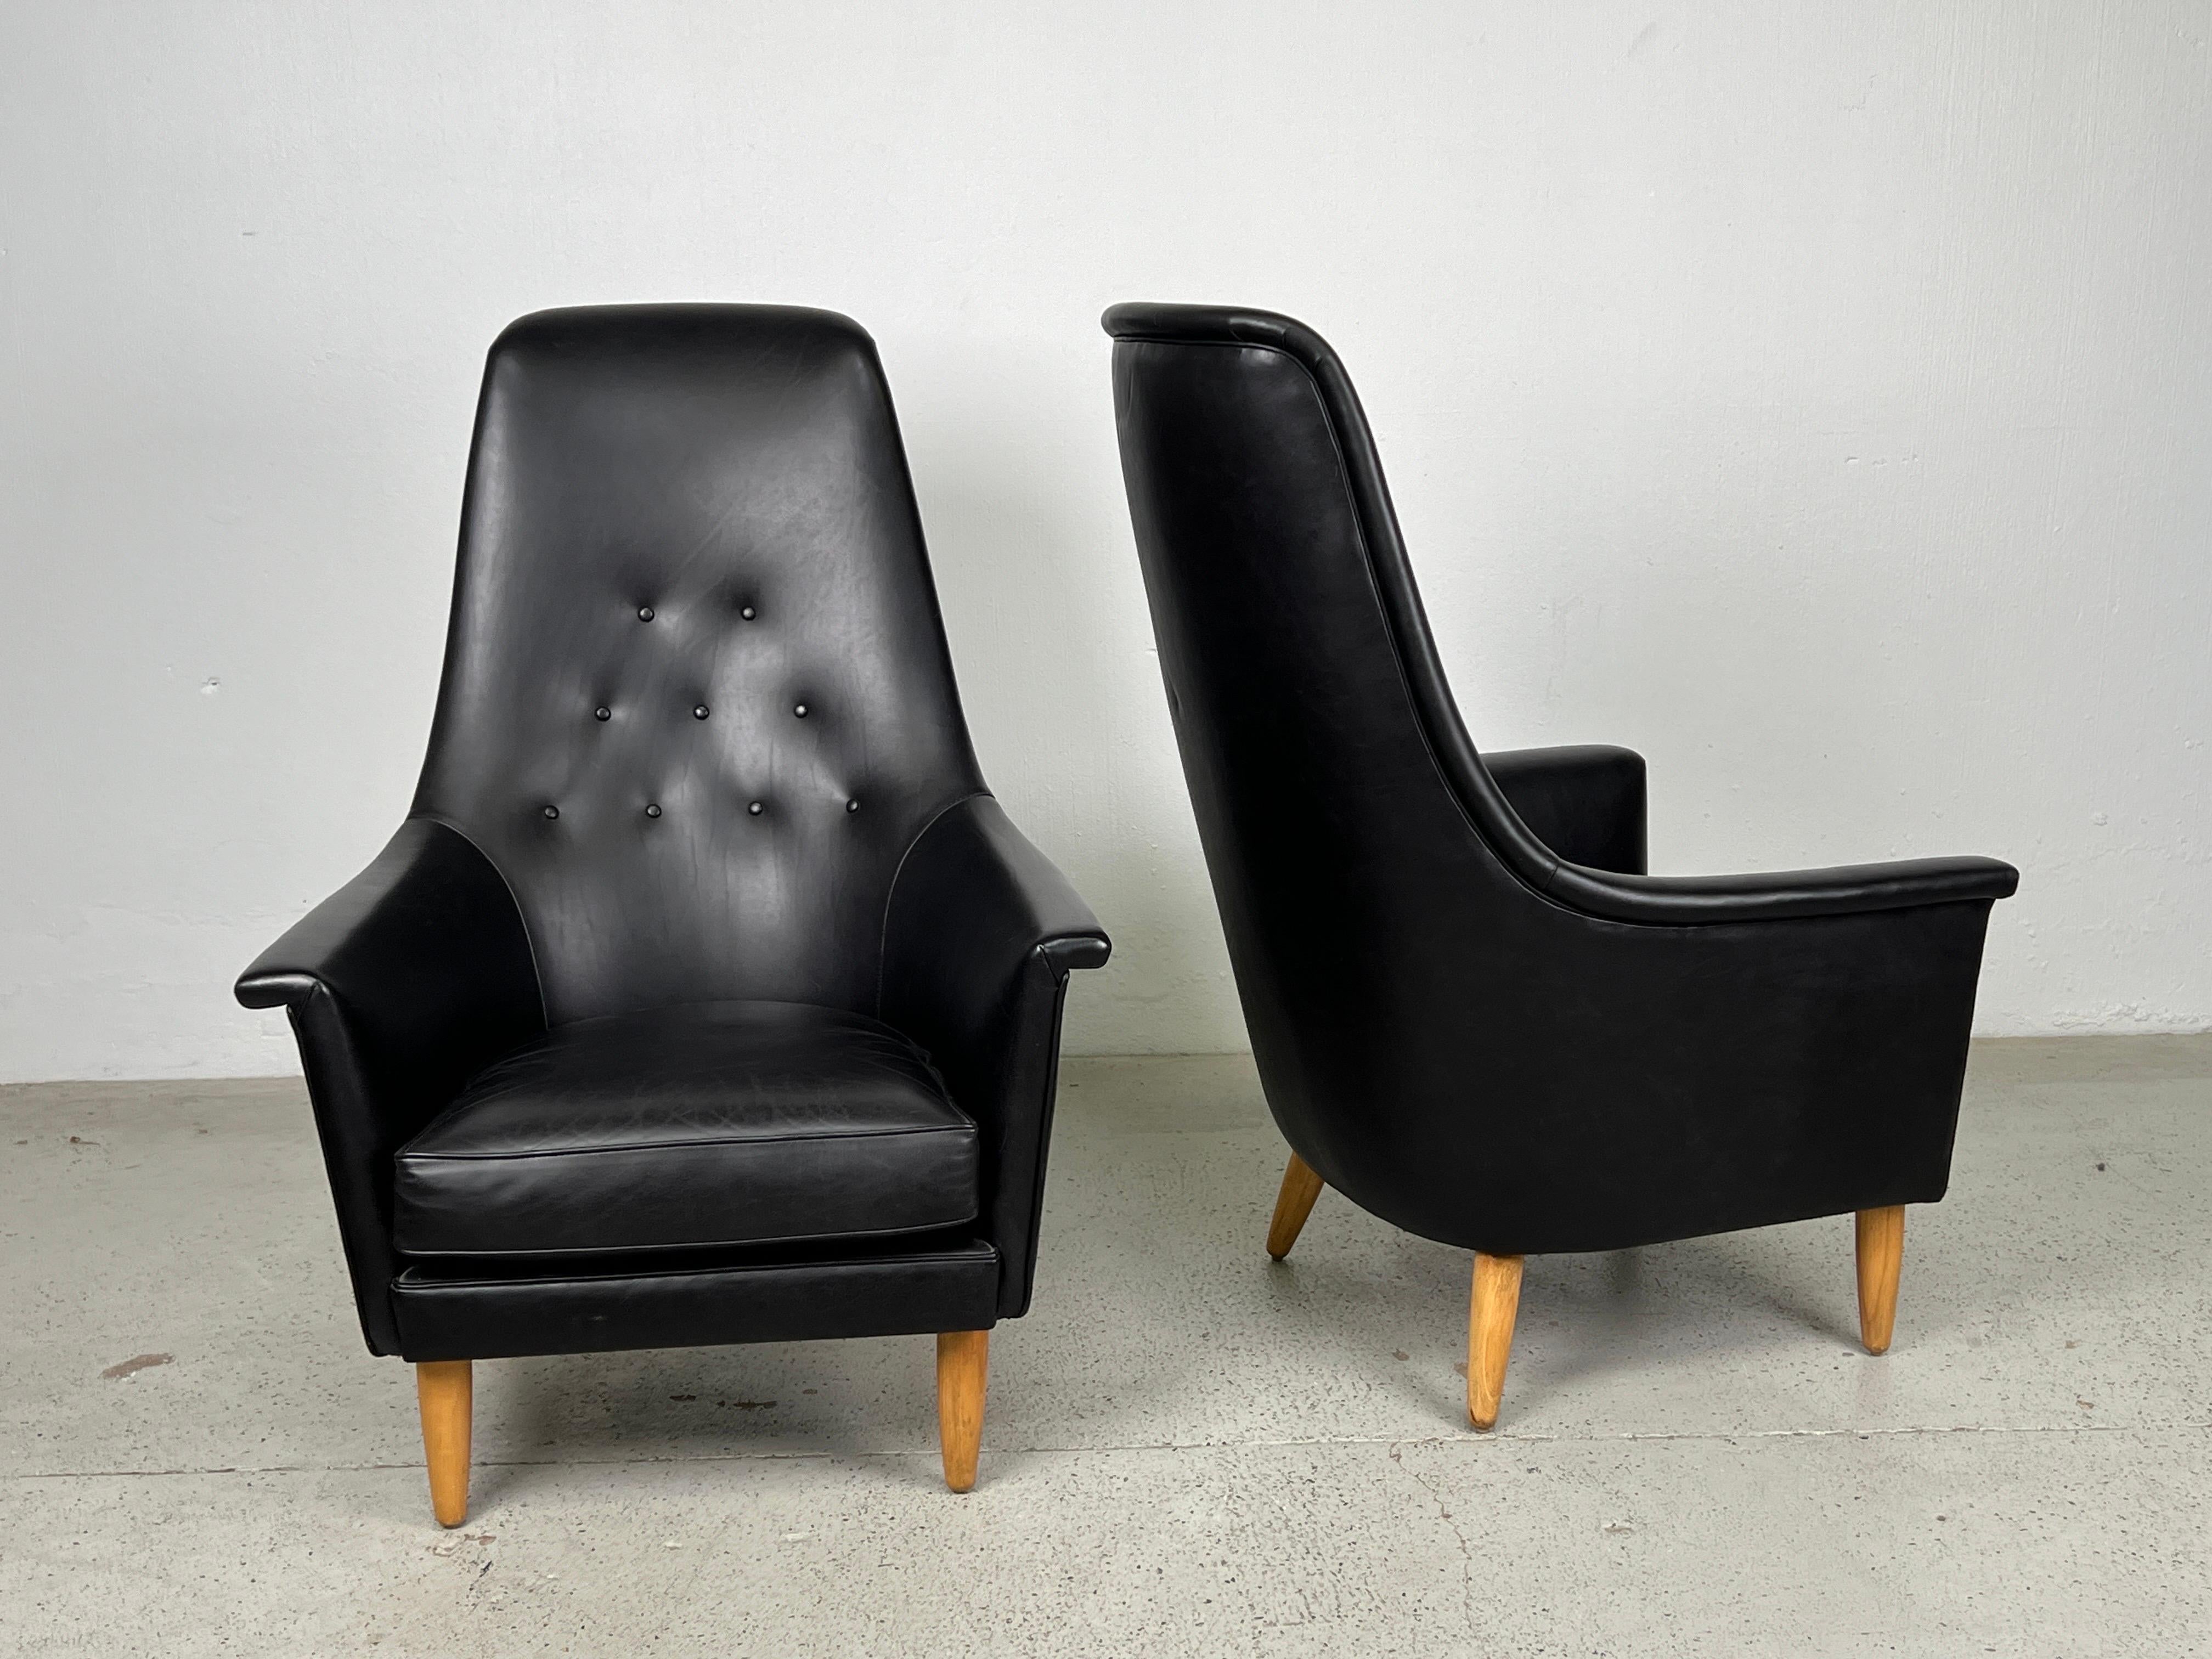 Pair of High Back Leather Lounge Chairs Attributed to Ib Kofod-Larsen In Good Condition For Sale In Dallas, TX